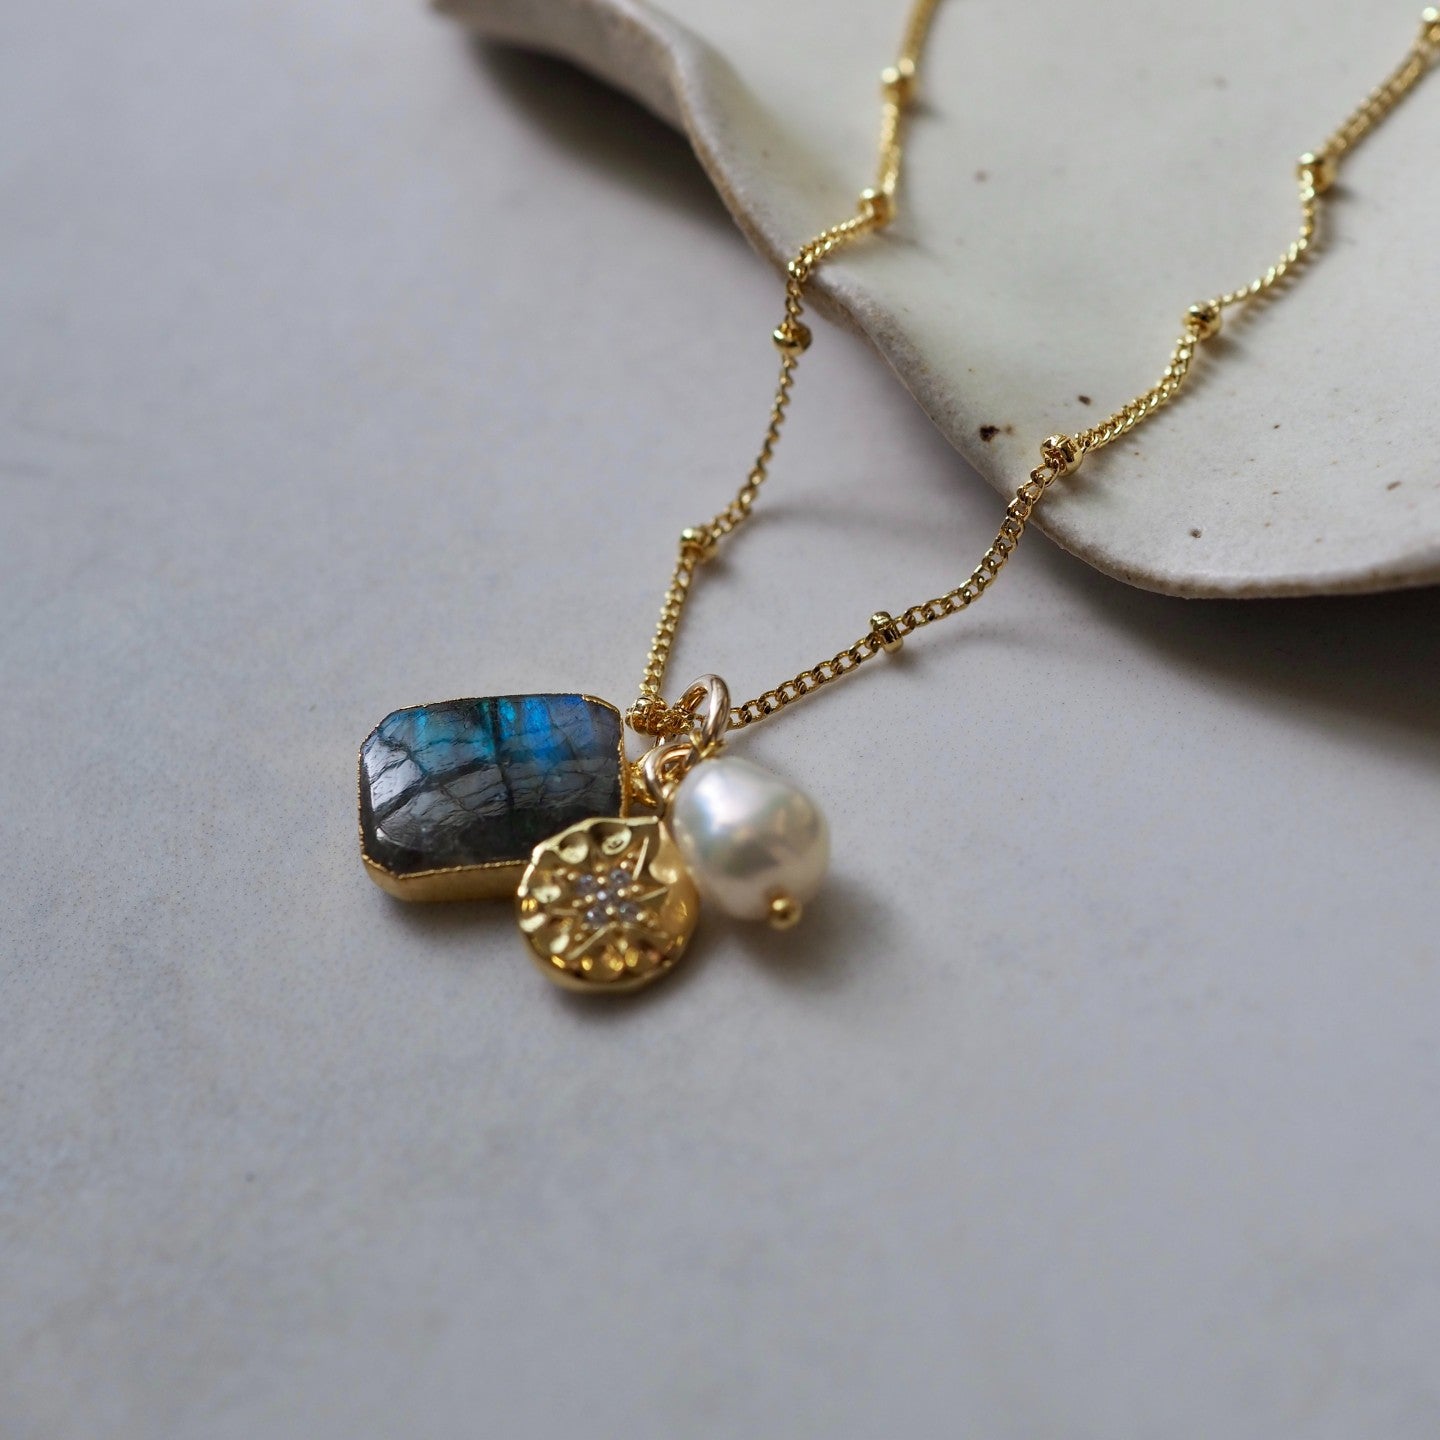 Limited Edition June Birthstone | Labradorite & Pearl Gem Slice Triple Necklace (Gold Plated or Sterling Silver)